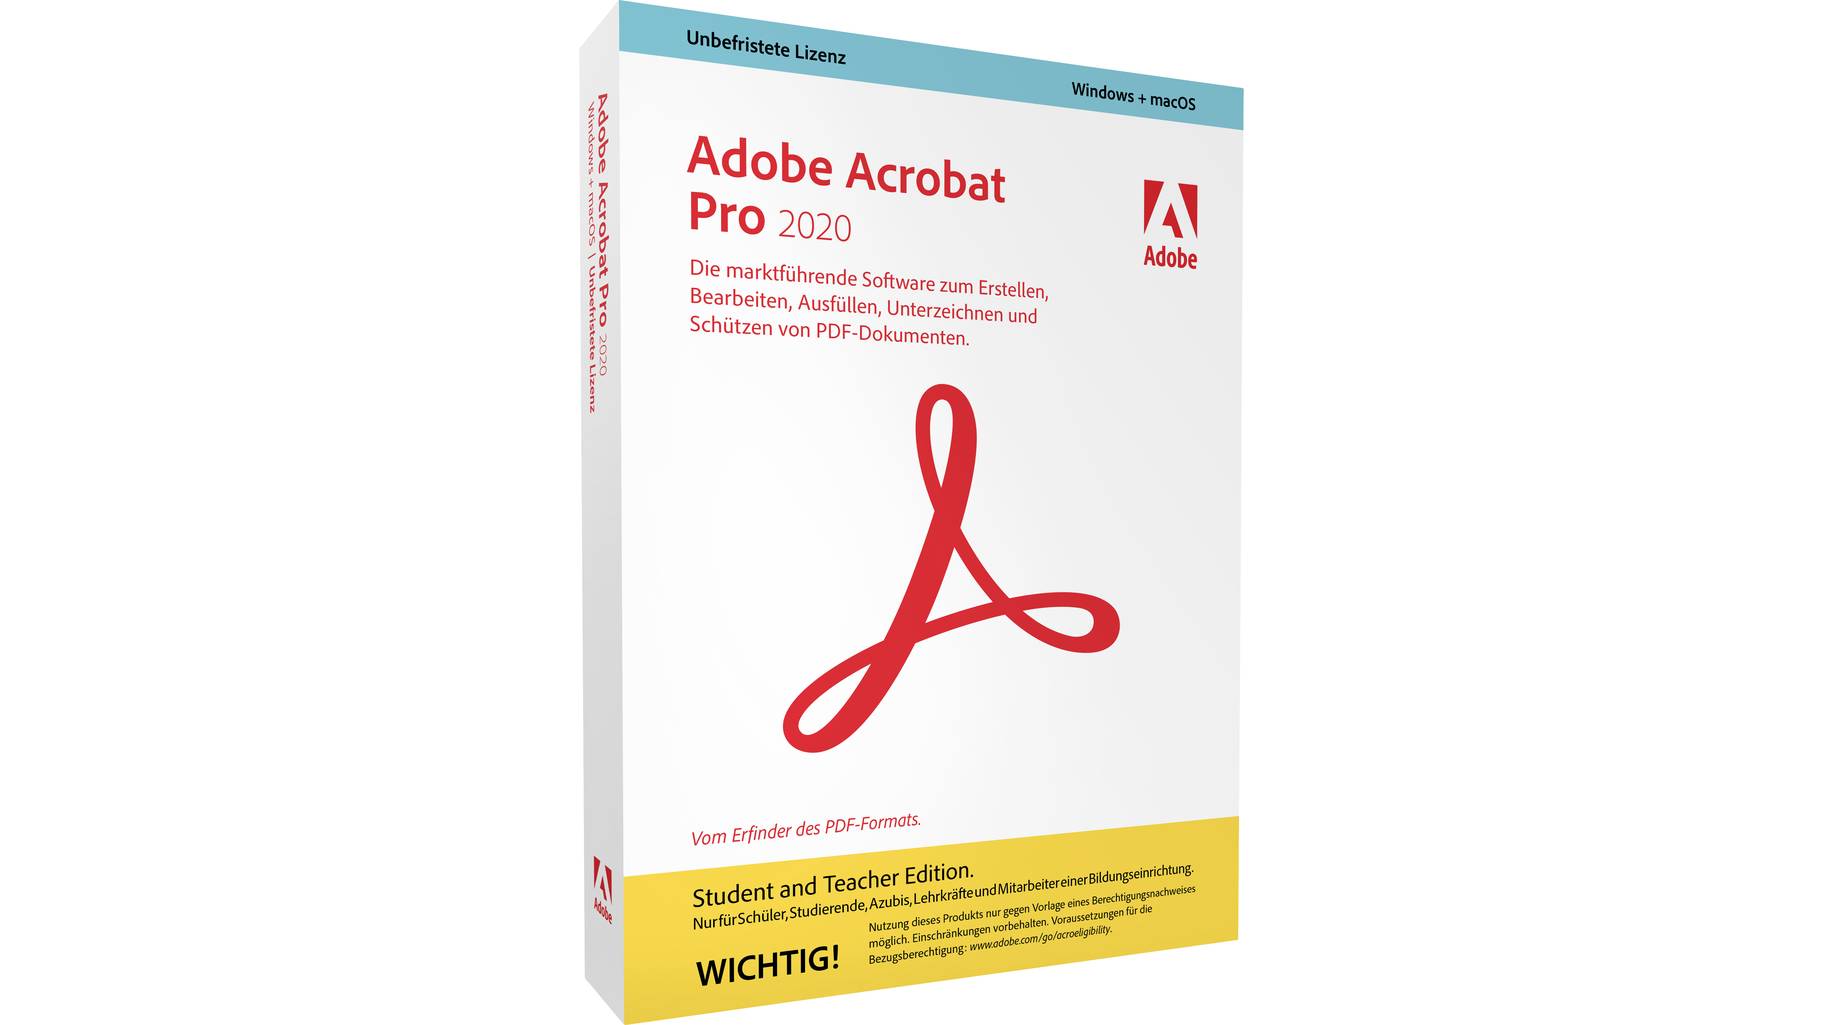 adobe acrobat x pro student and teacher edition download